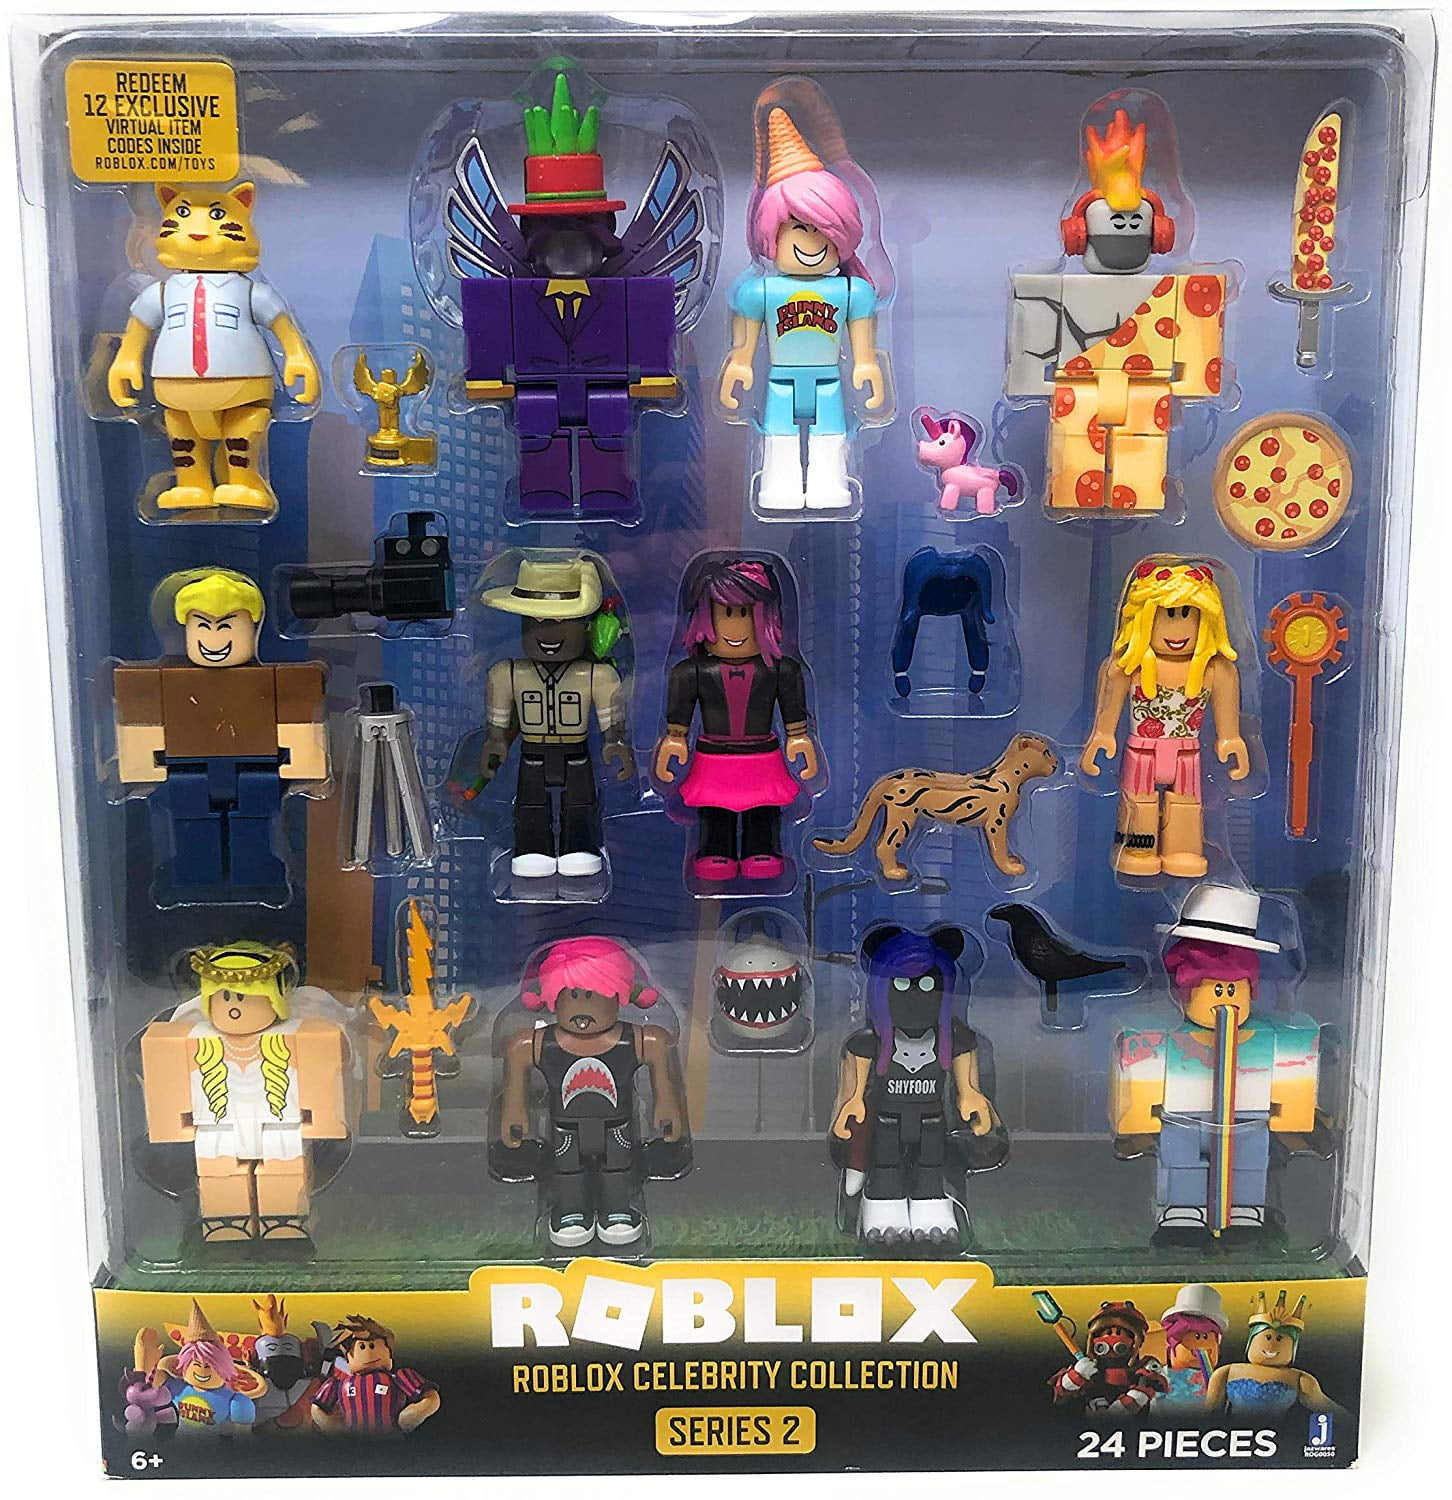 Roblox Series 2 Roblox Celebrity Collection 24 Piece Set Walmart Com Walmart Com - roblox sets walmart